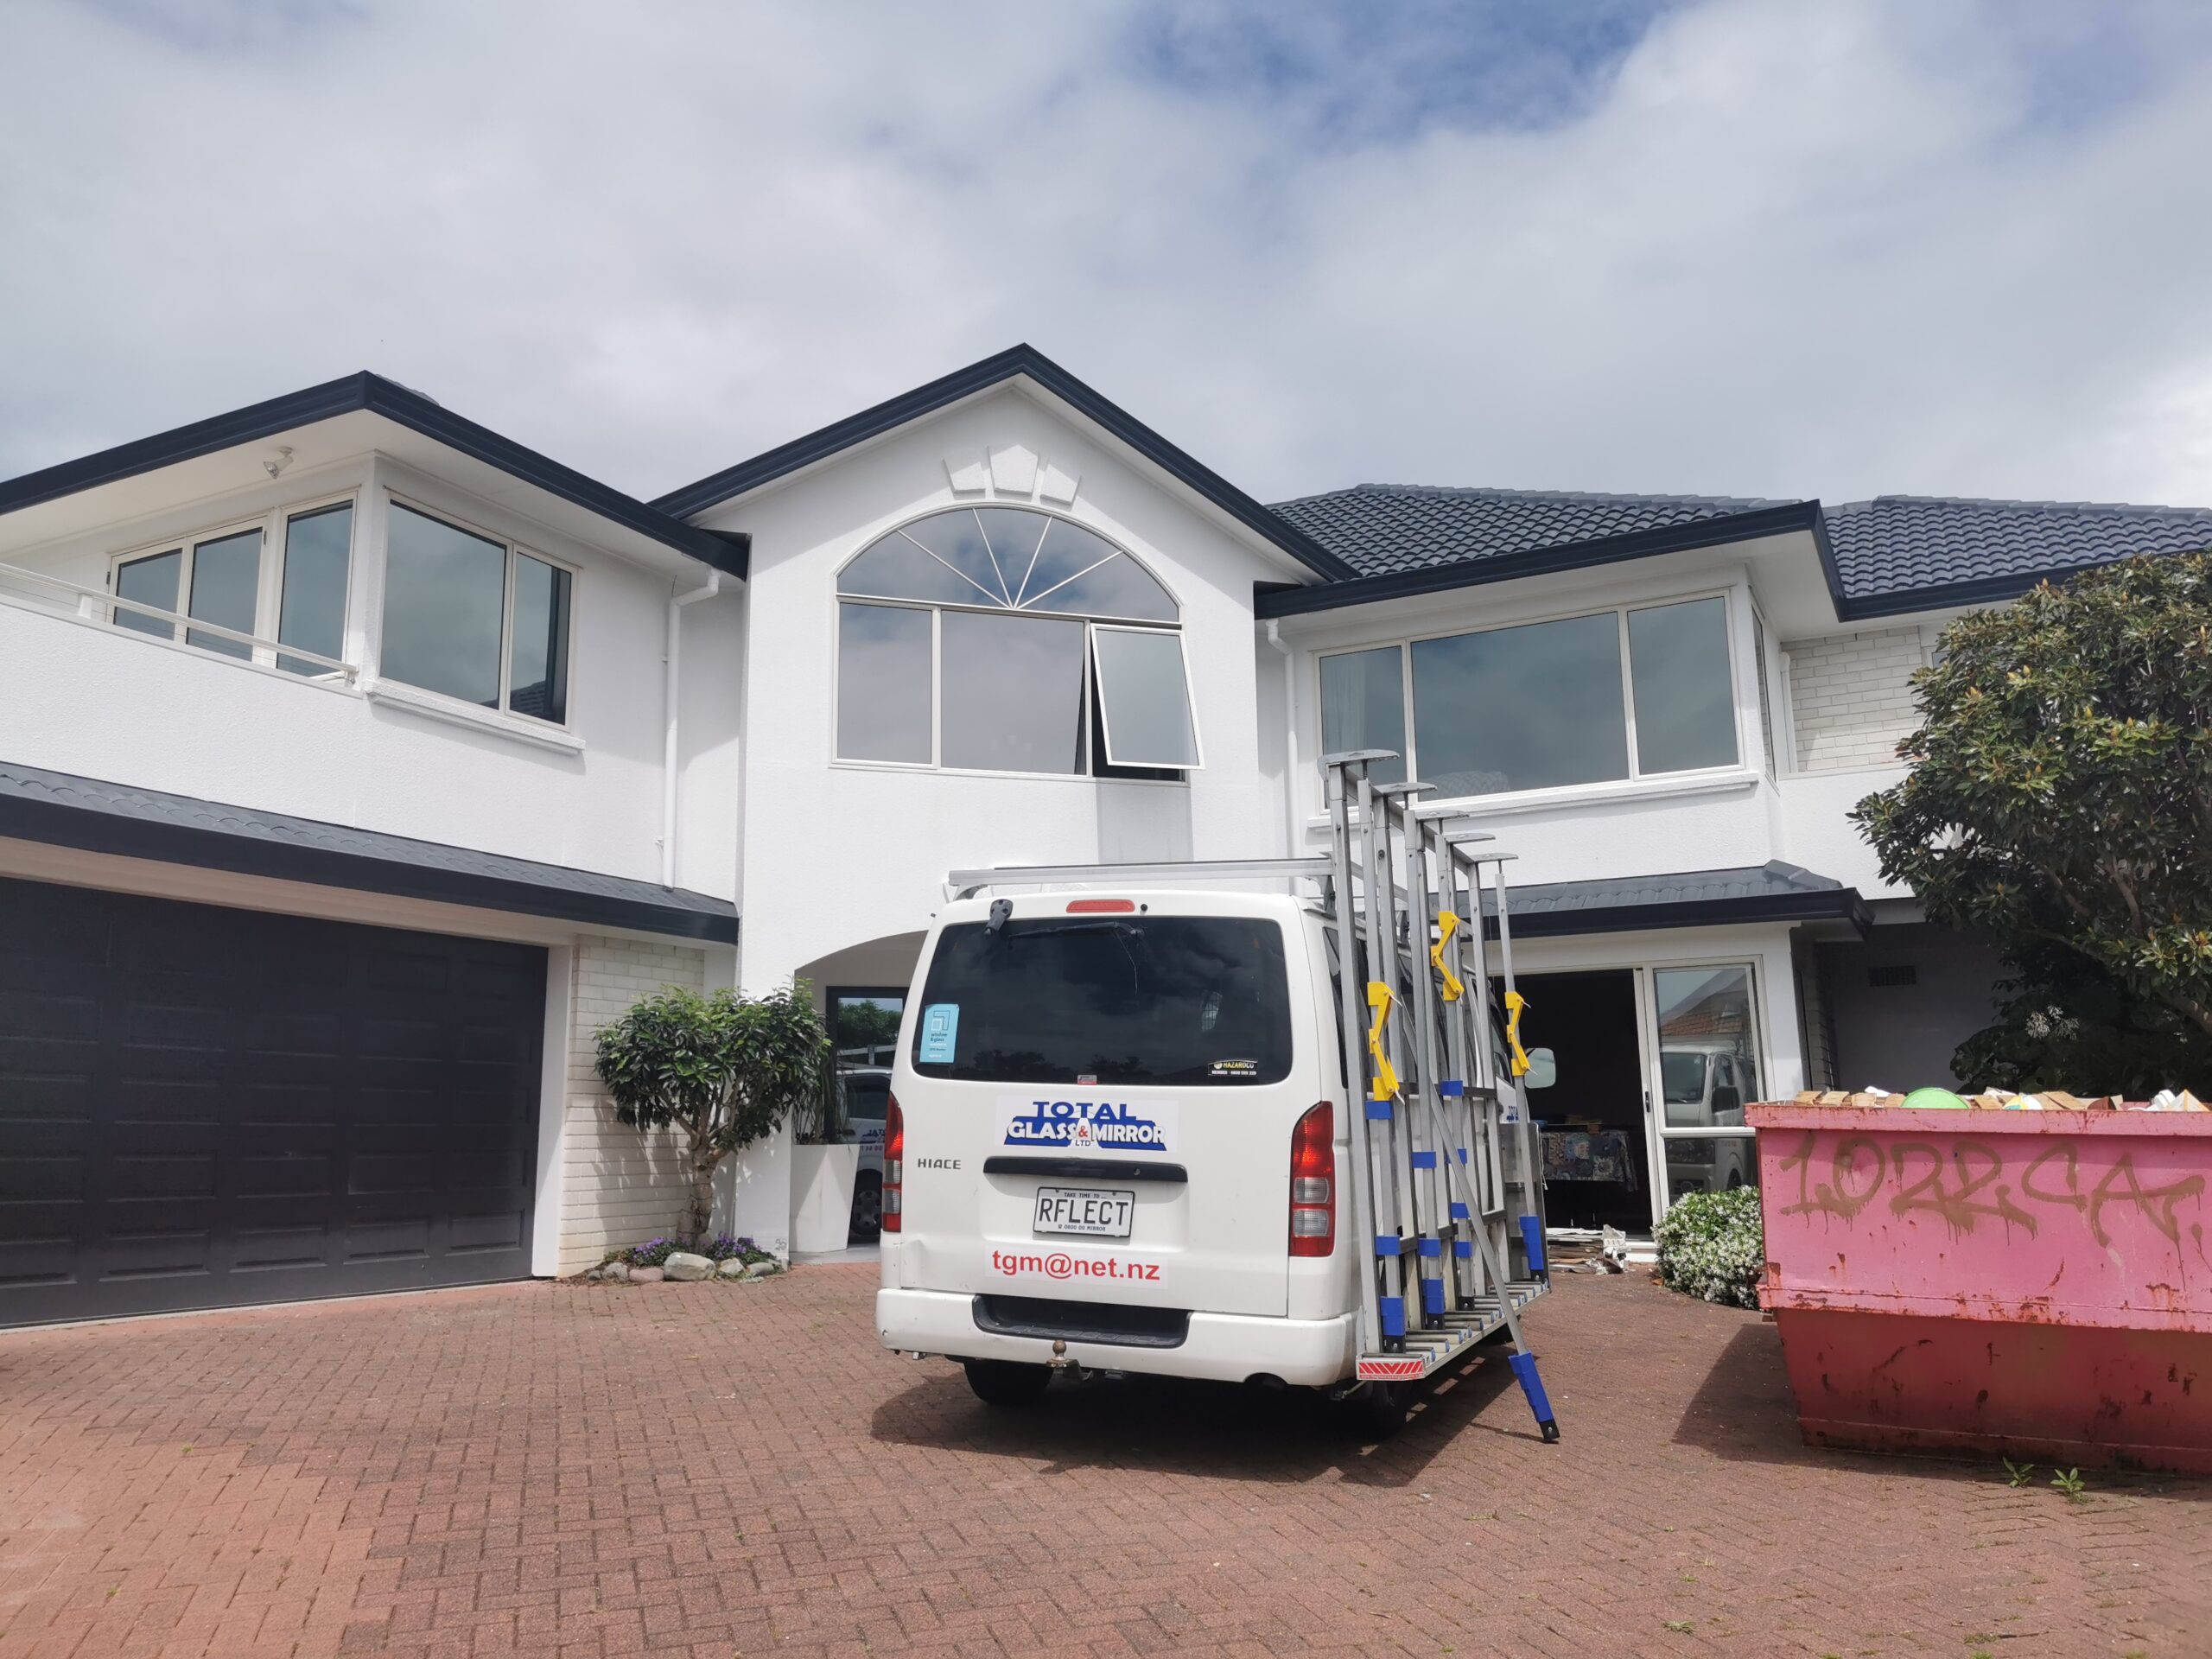 window glass replacement auckland job today